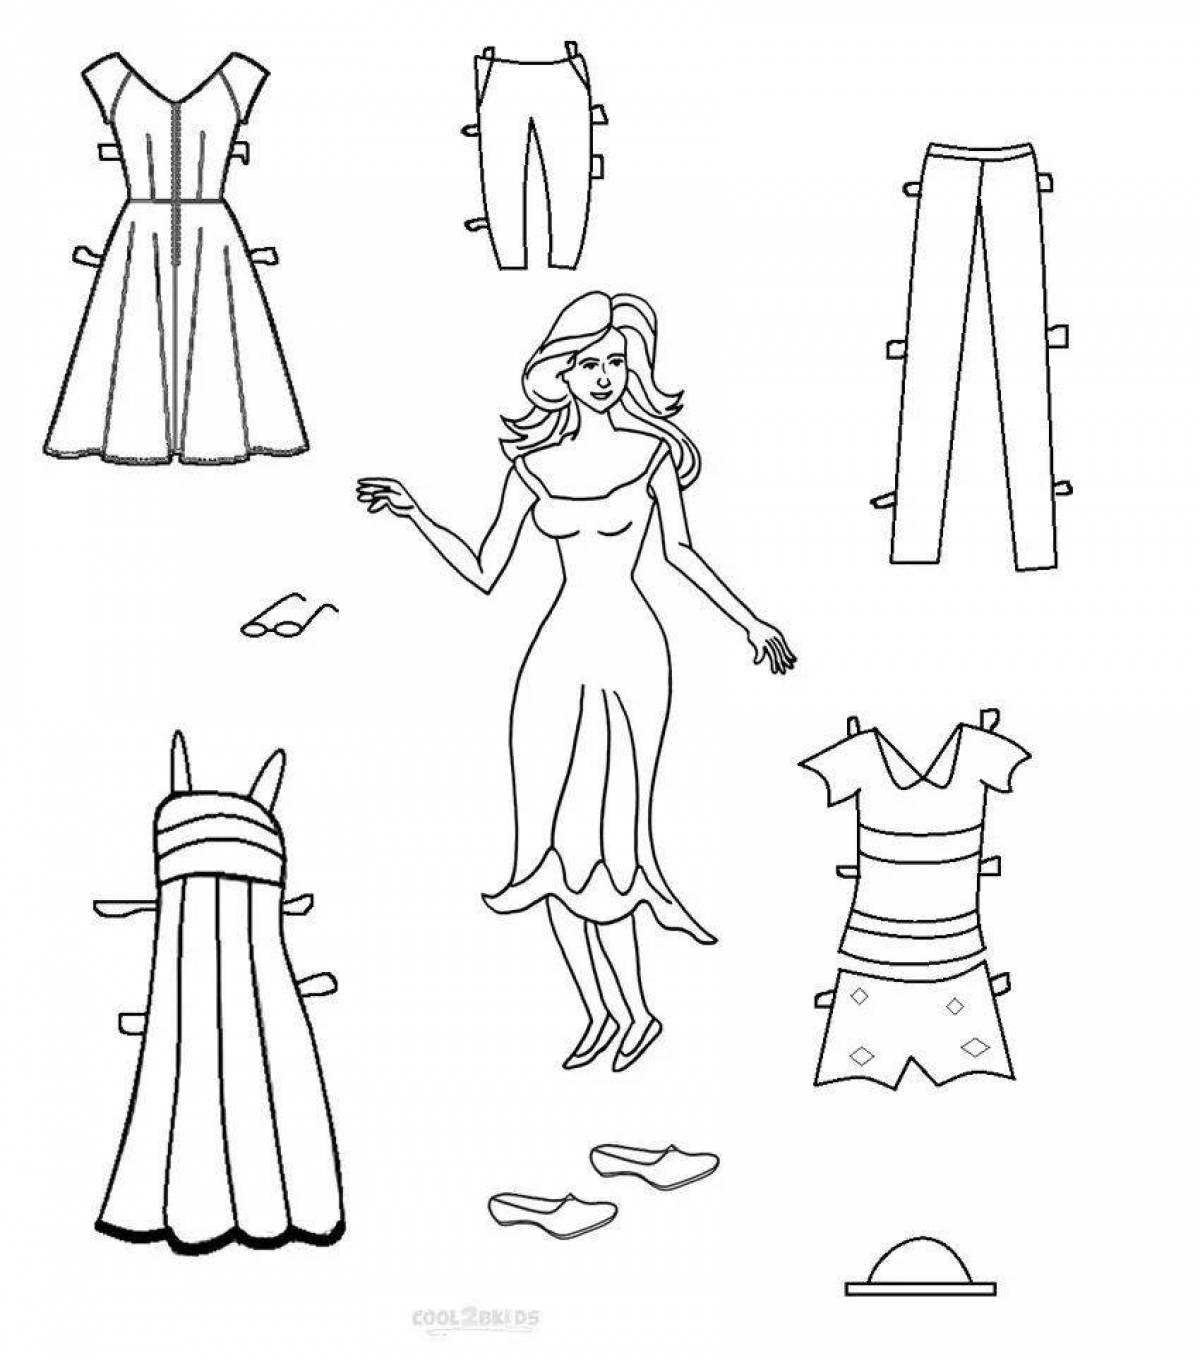 Paper doll with clothes to cut out #8